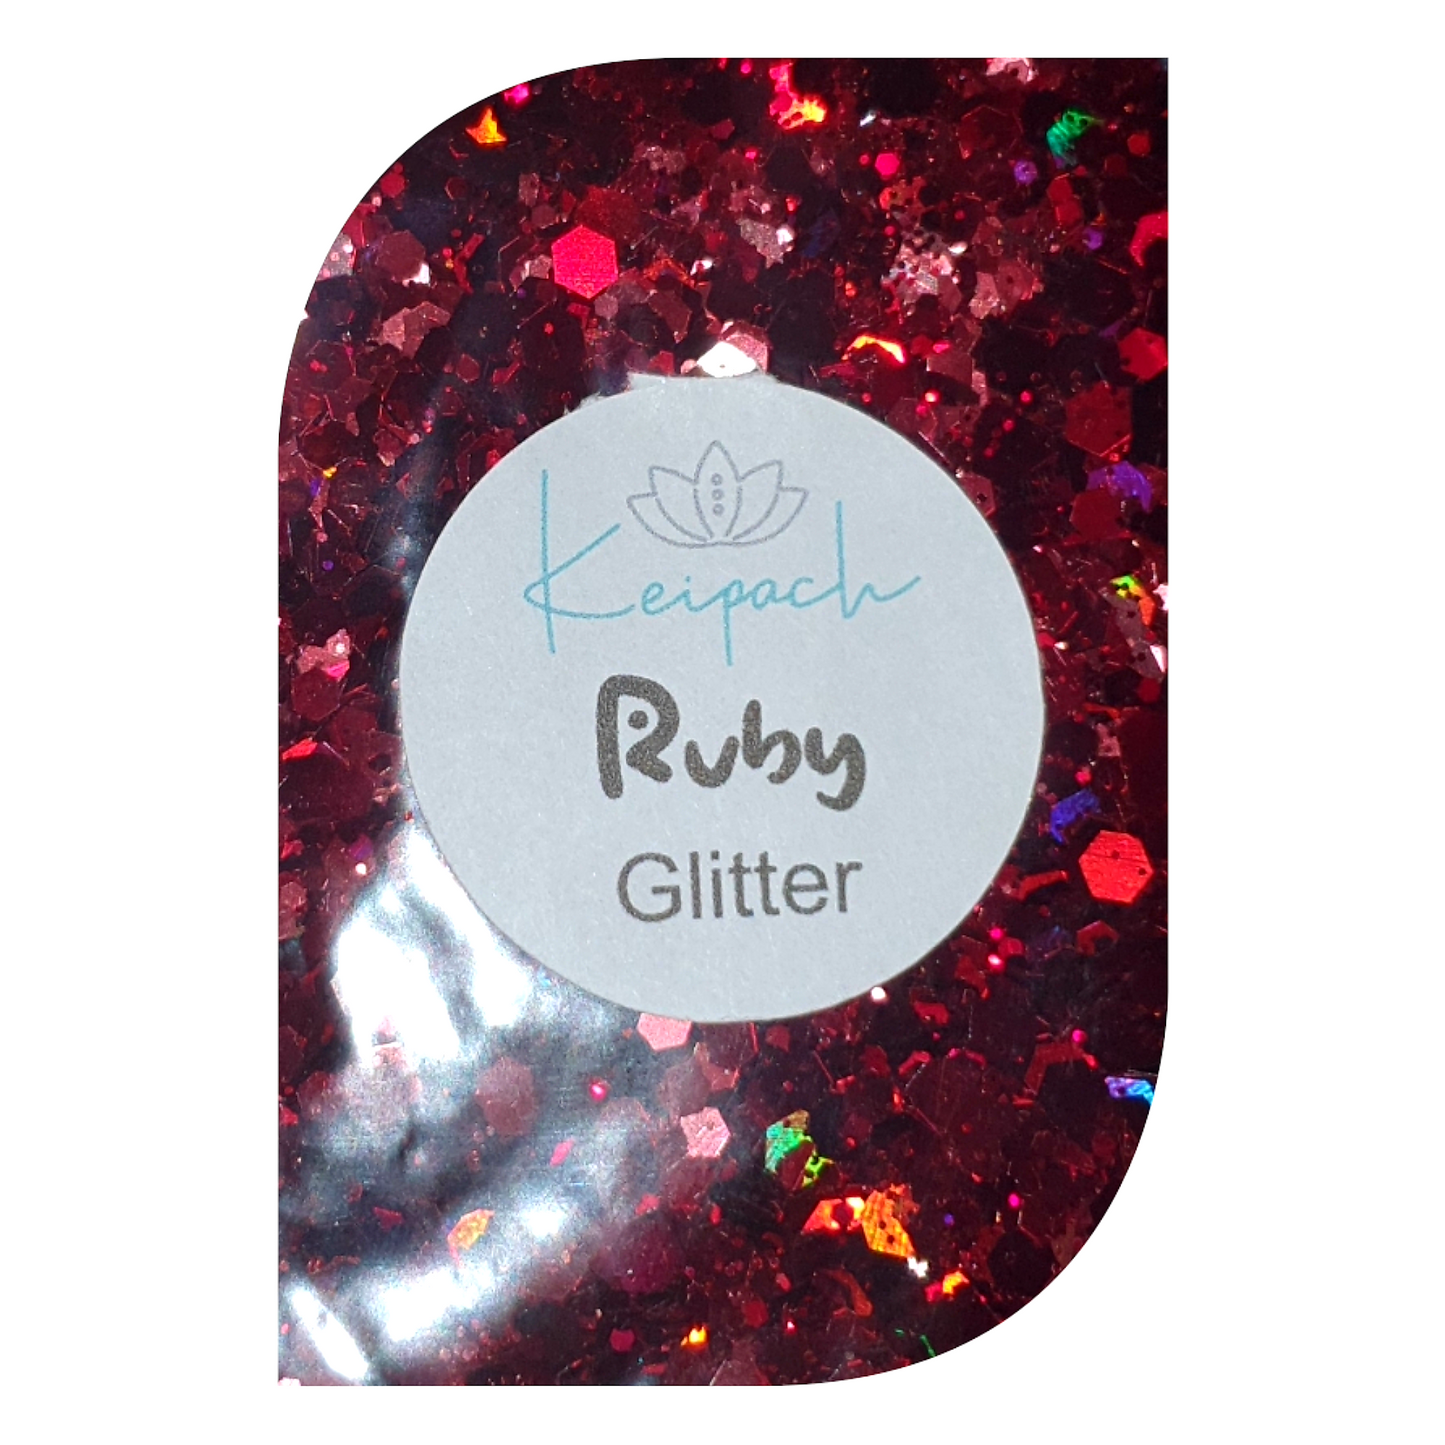 Chunky Holographic Glitter - Ruby - Keipach